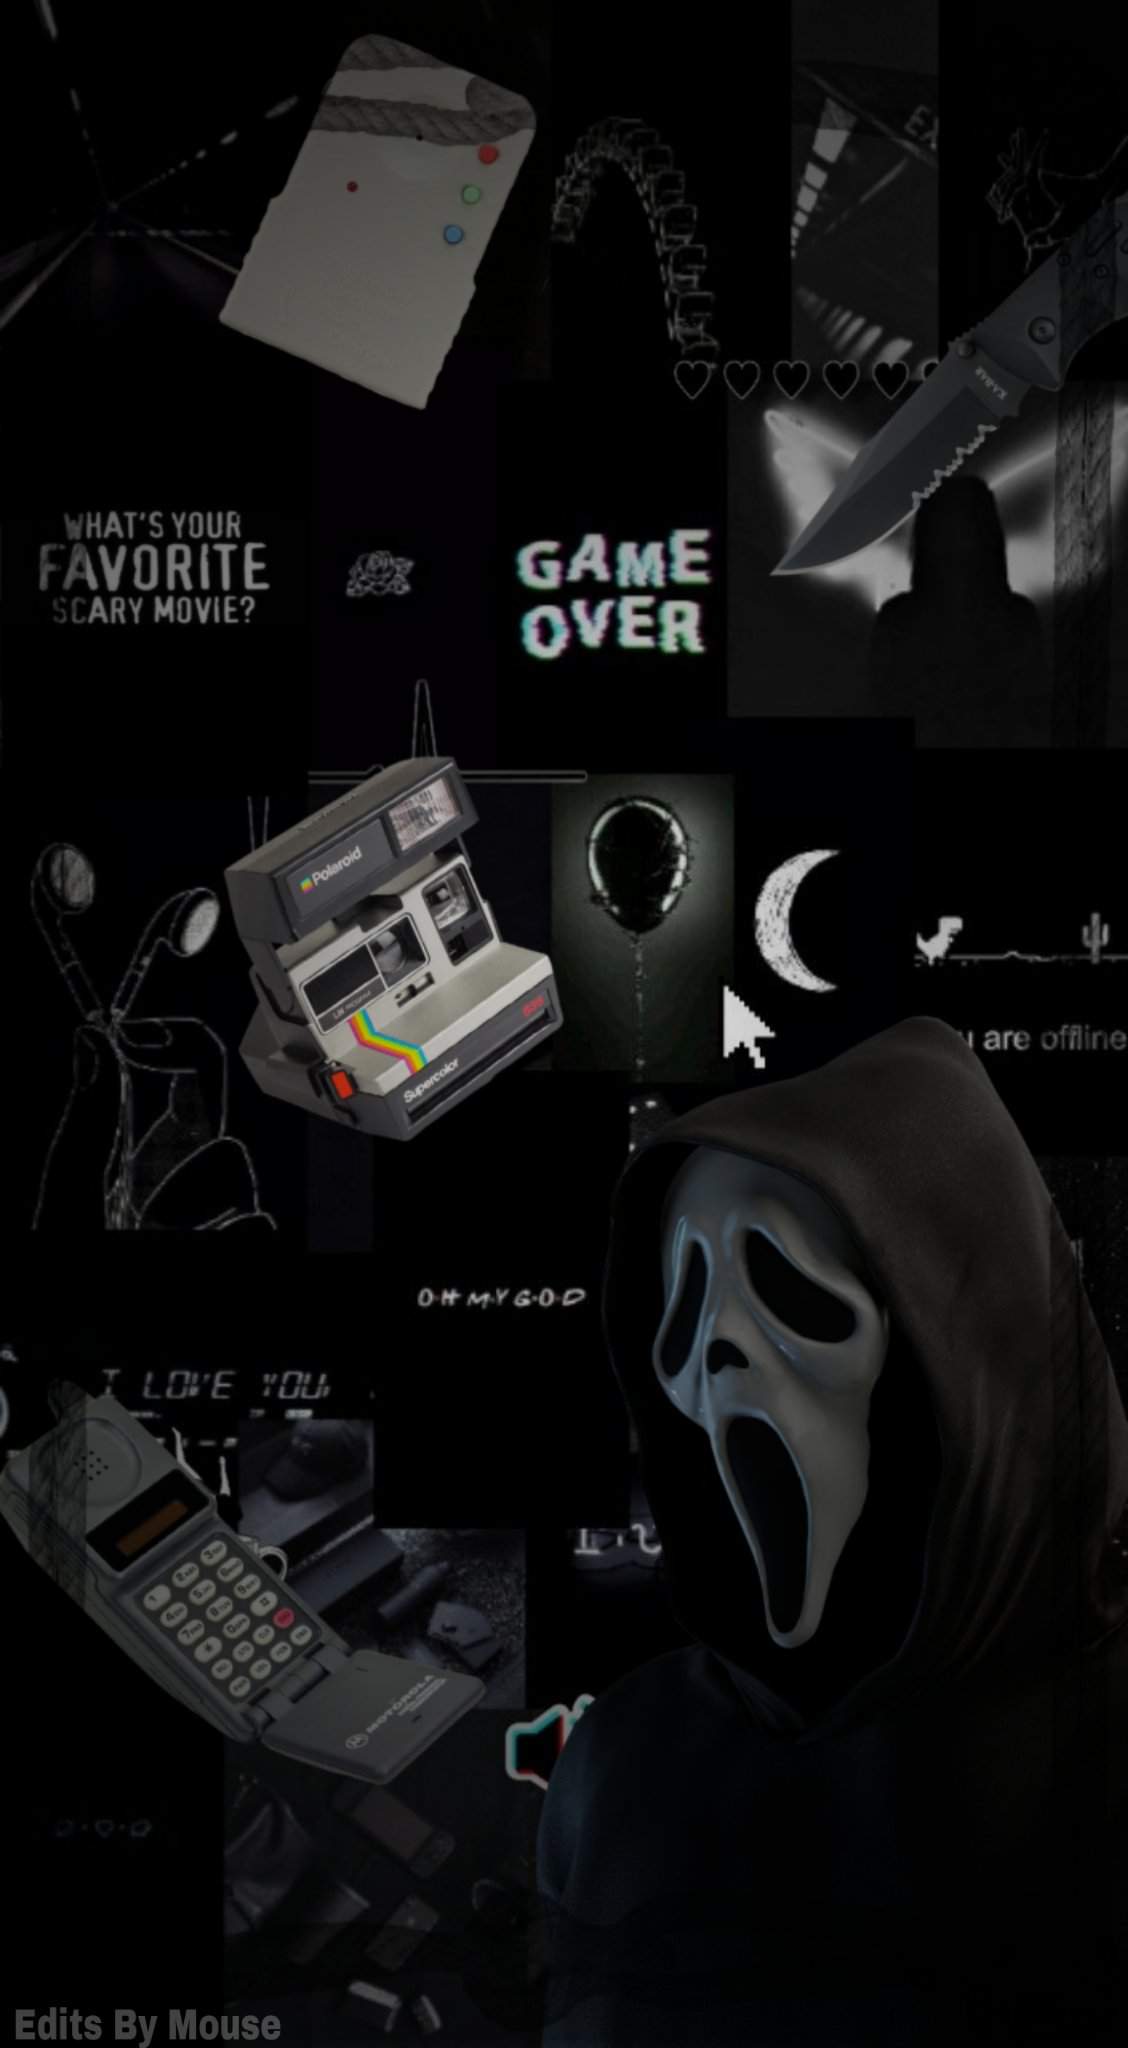 Scream Aesthetic wallpaper by mouse edits - Ghostface